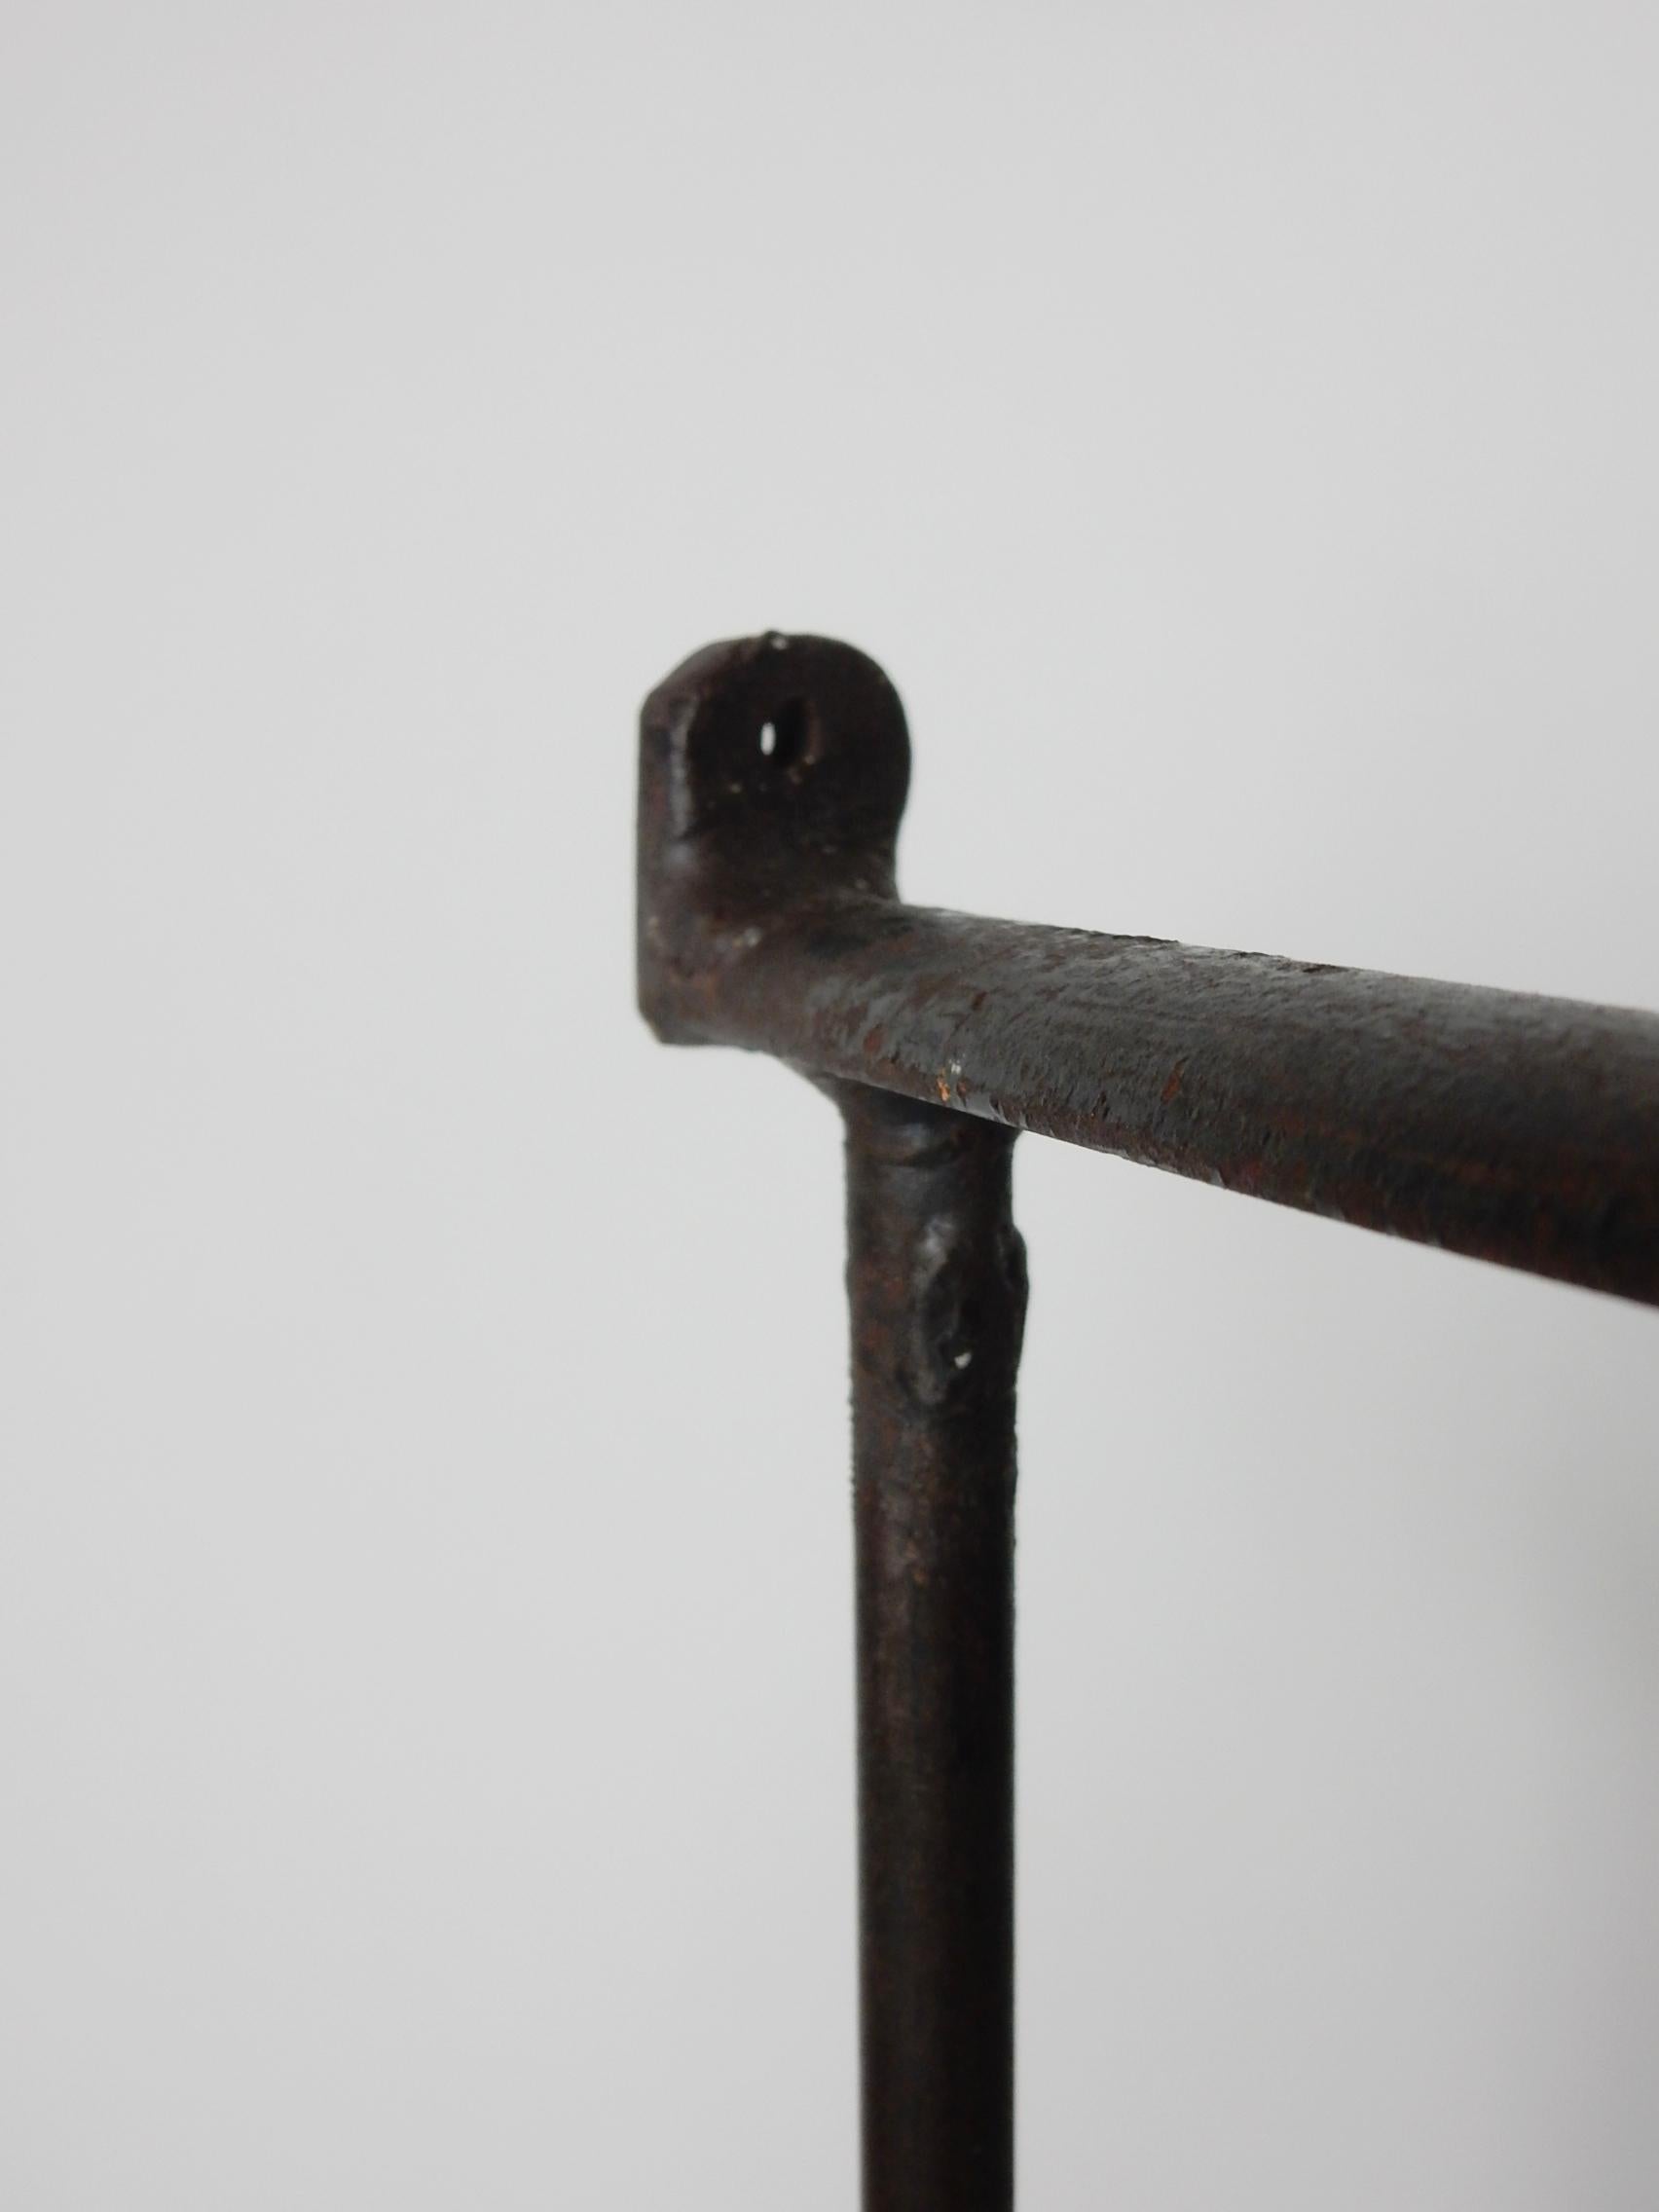 1950s Modernist Sculpted Iron Handrail Architectural Element 1